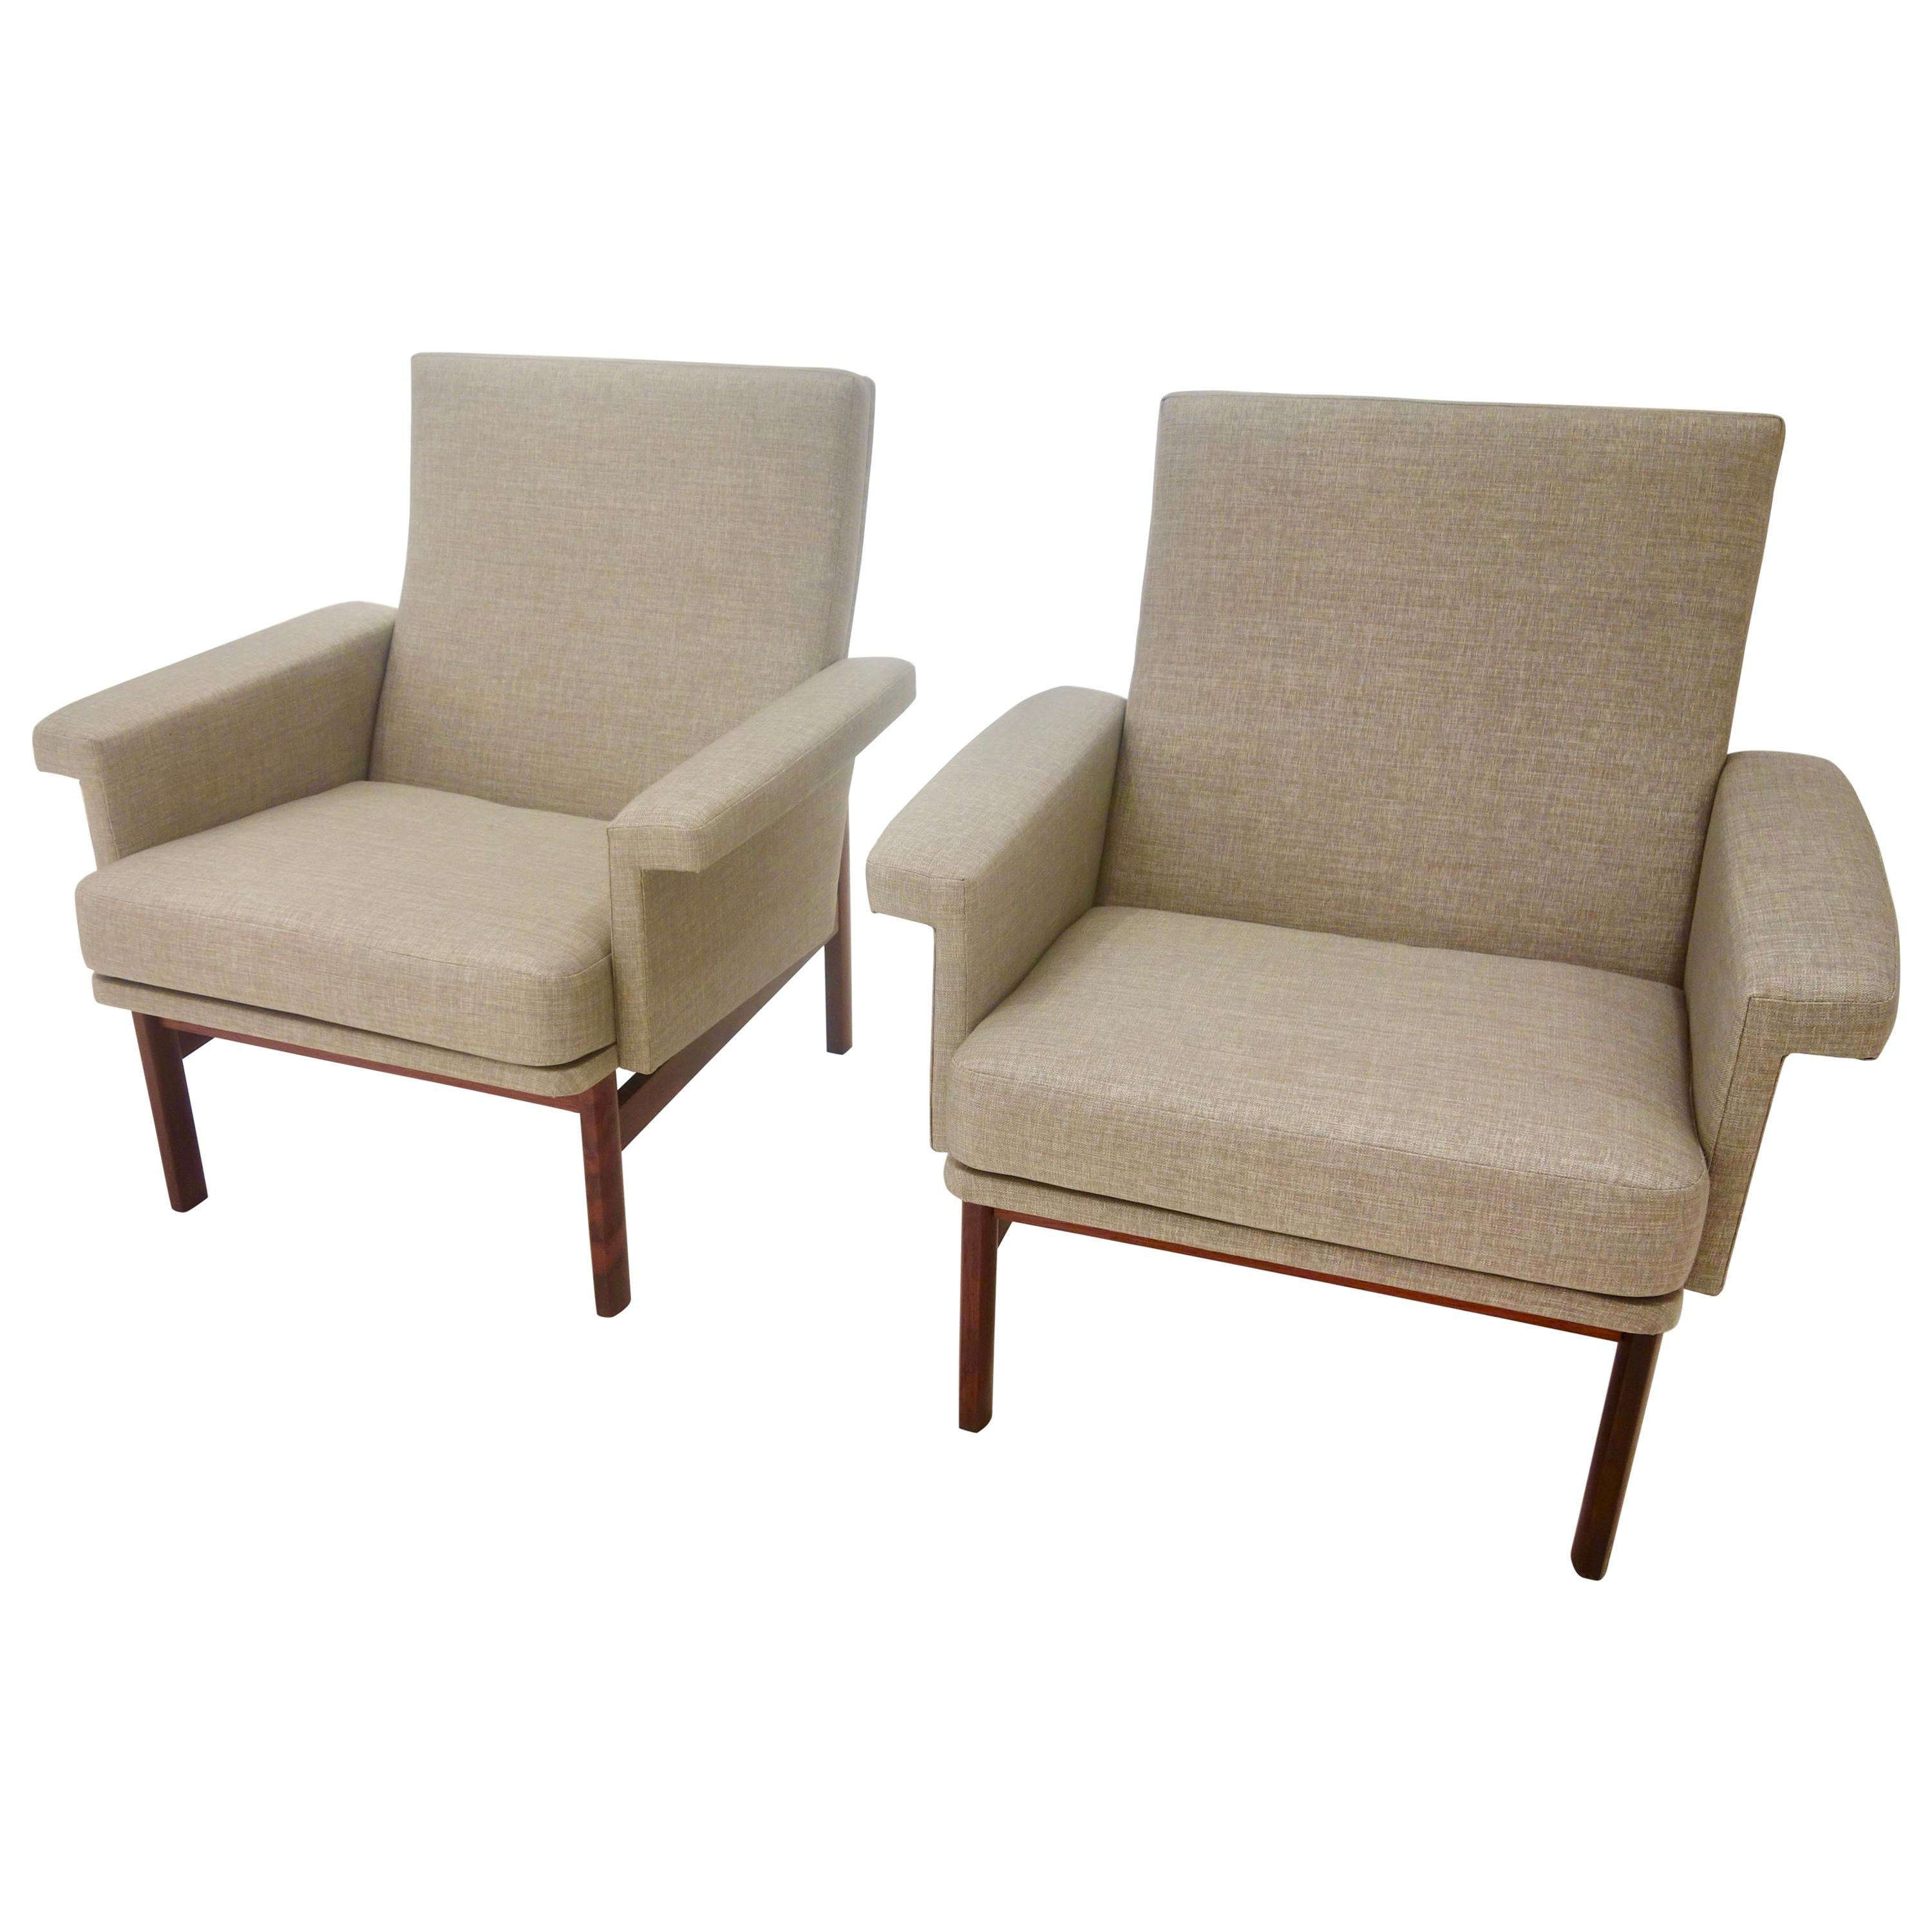 Pair of Finn Juhl Lounge or Armchairs for France & Son in Greige Fabric